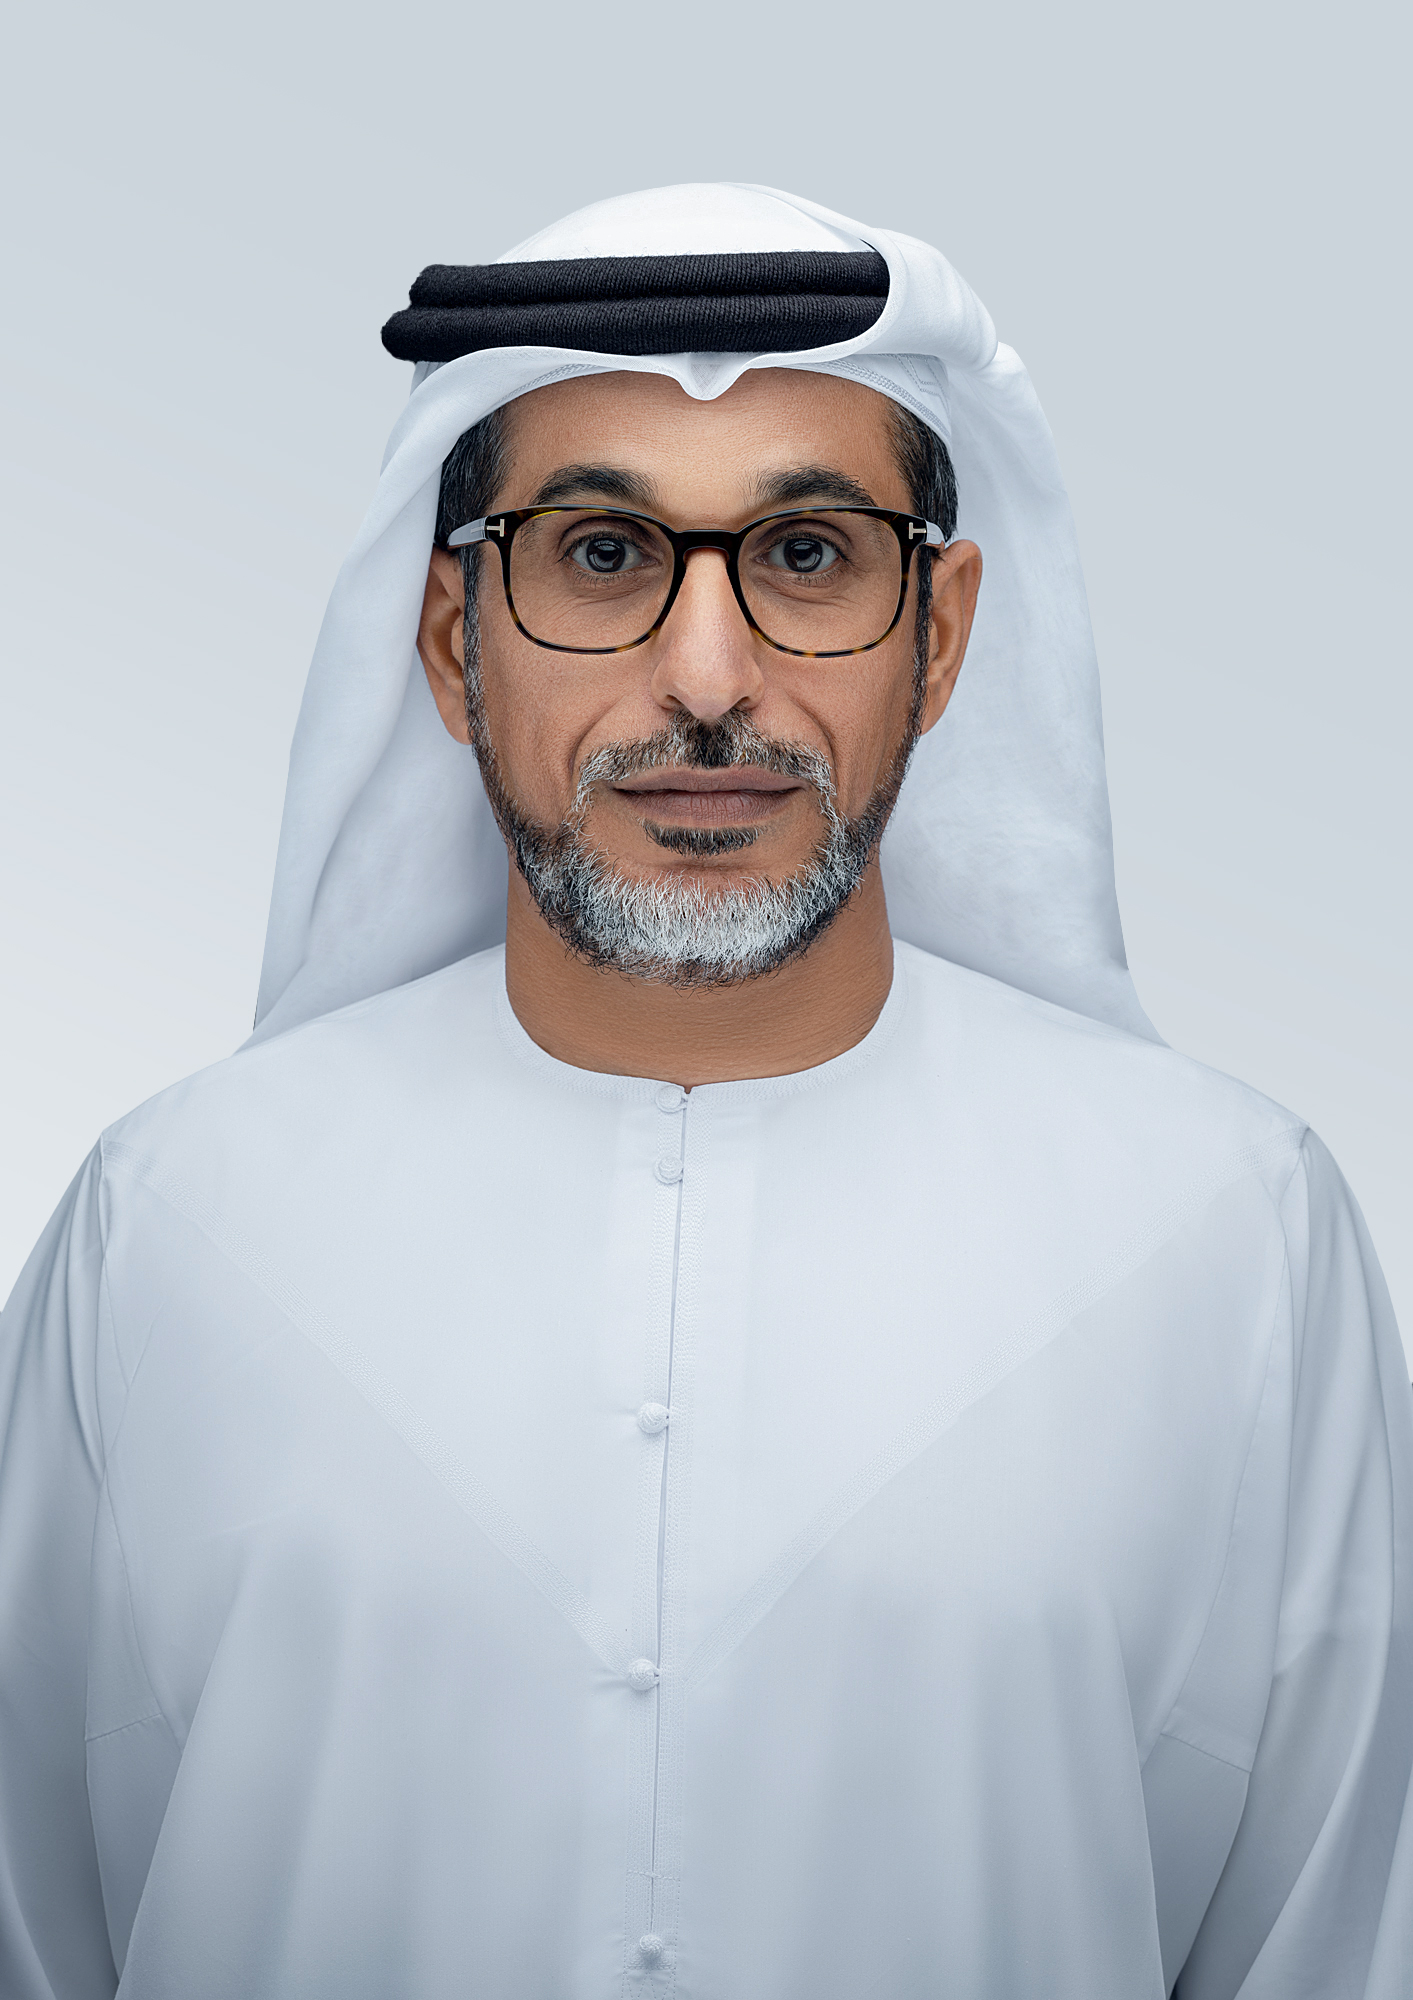 In Our Developmental Work, We Follow In The Footsteps Of Sheikh Zayed: Mohamed Saif Al Suwaidi